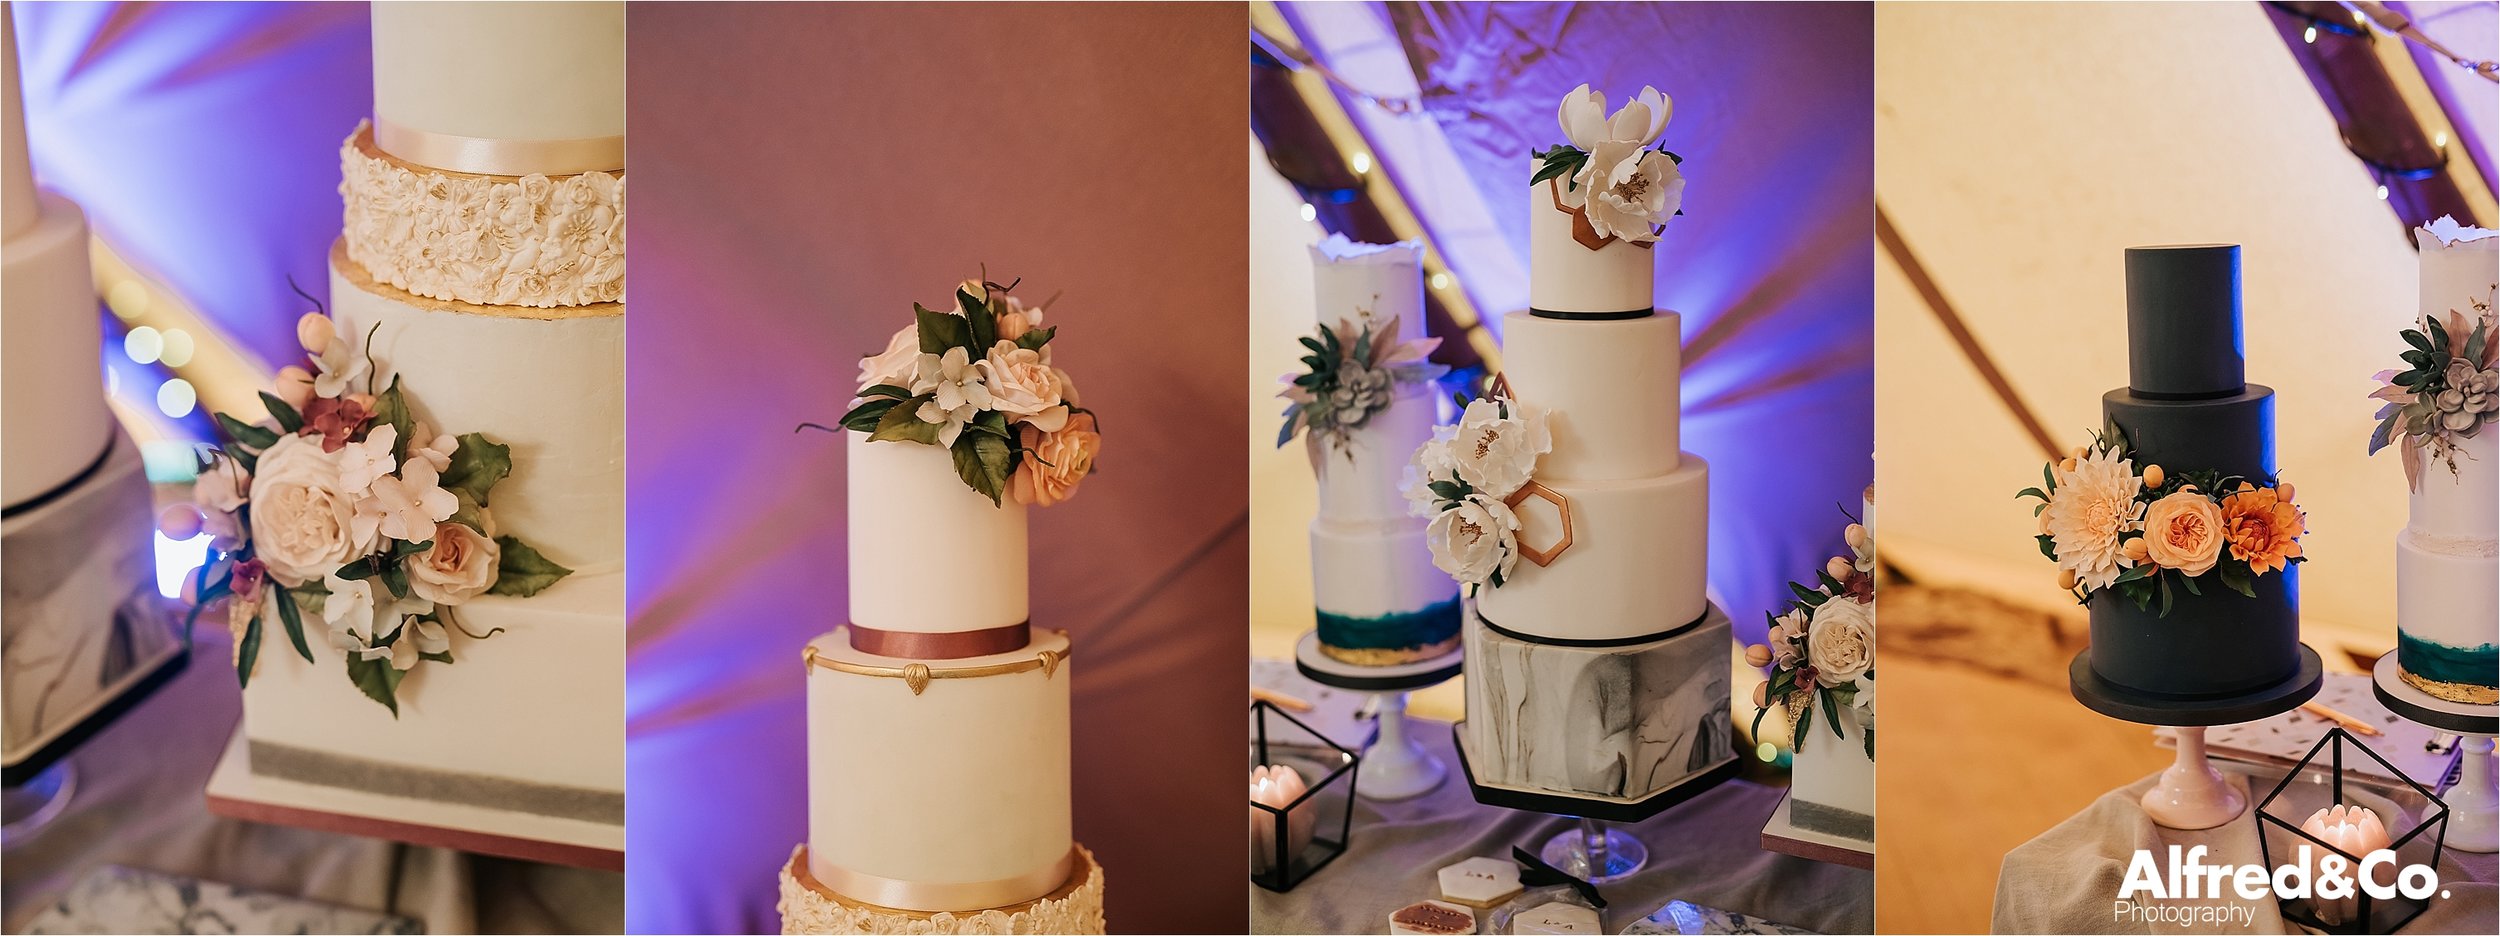 Wedding Cakes in tipi in cheshire 